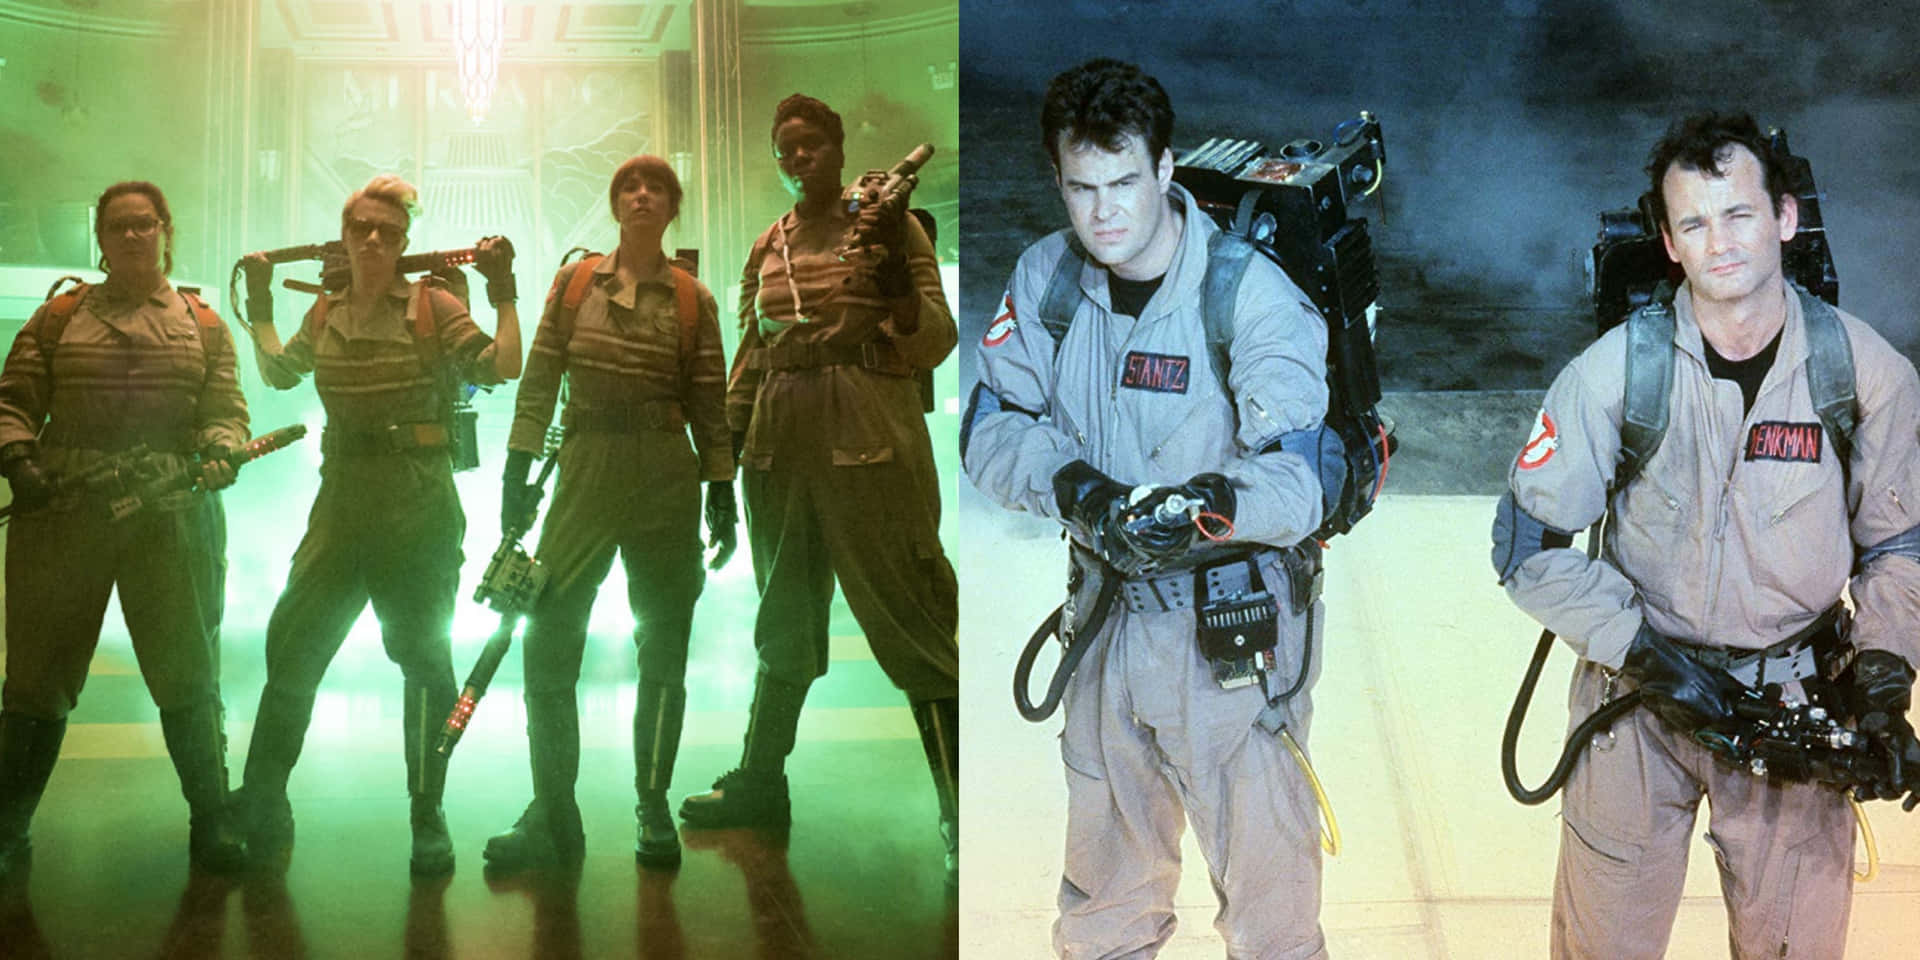 The Original Ghostbusters Team in Action